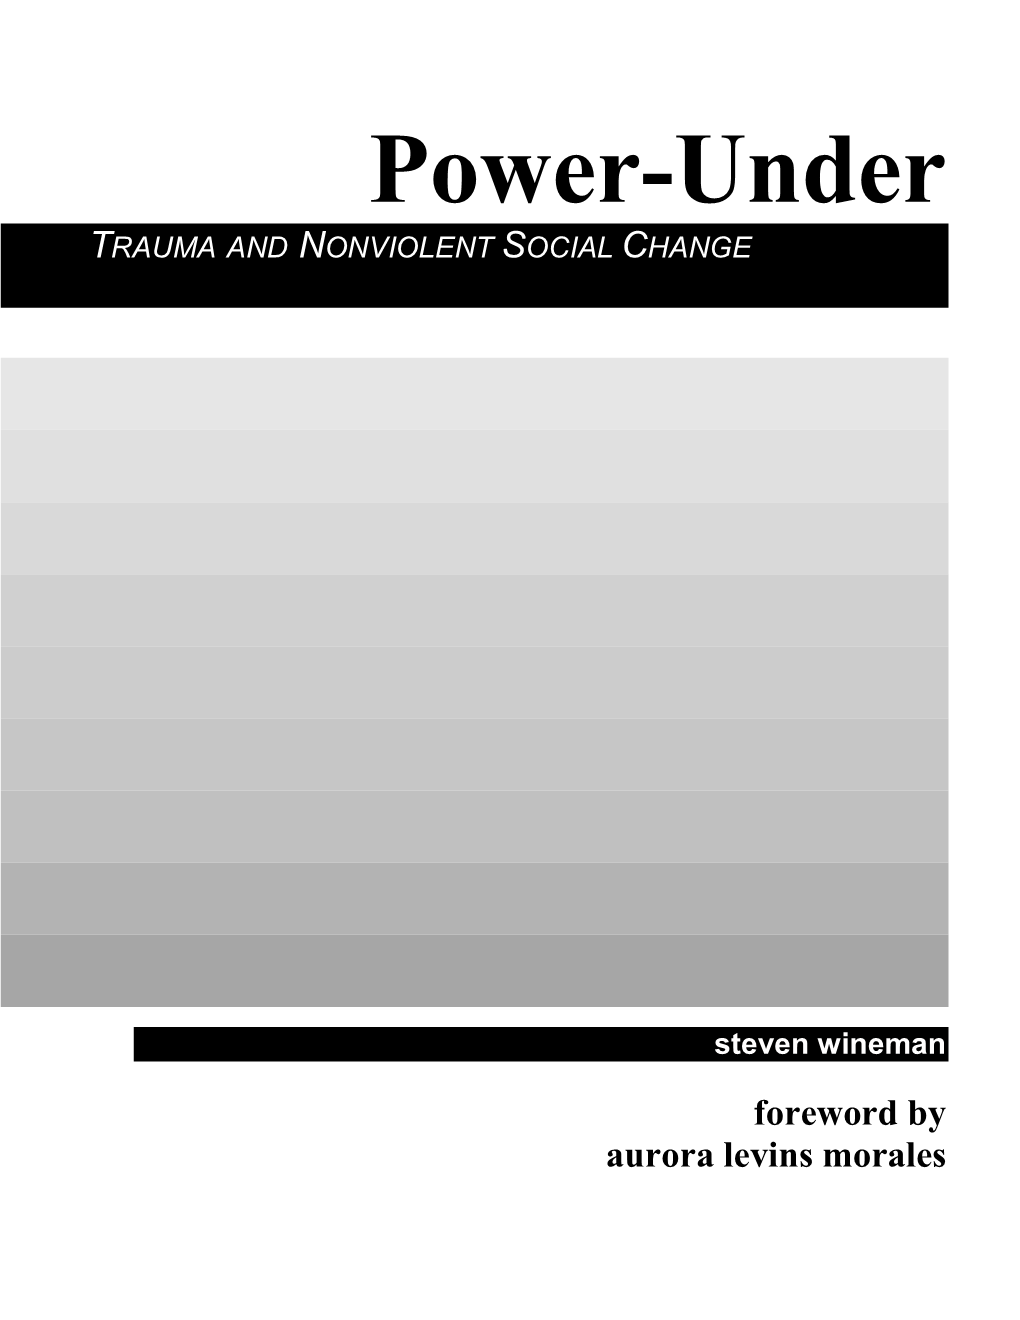 Download Power-Under As A